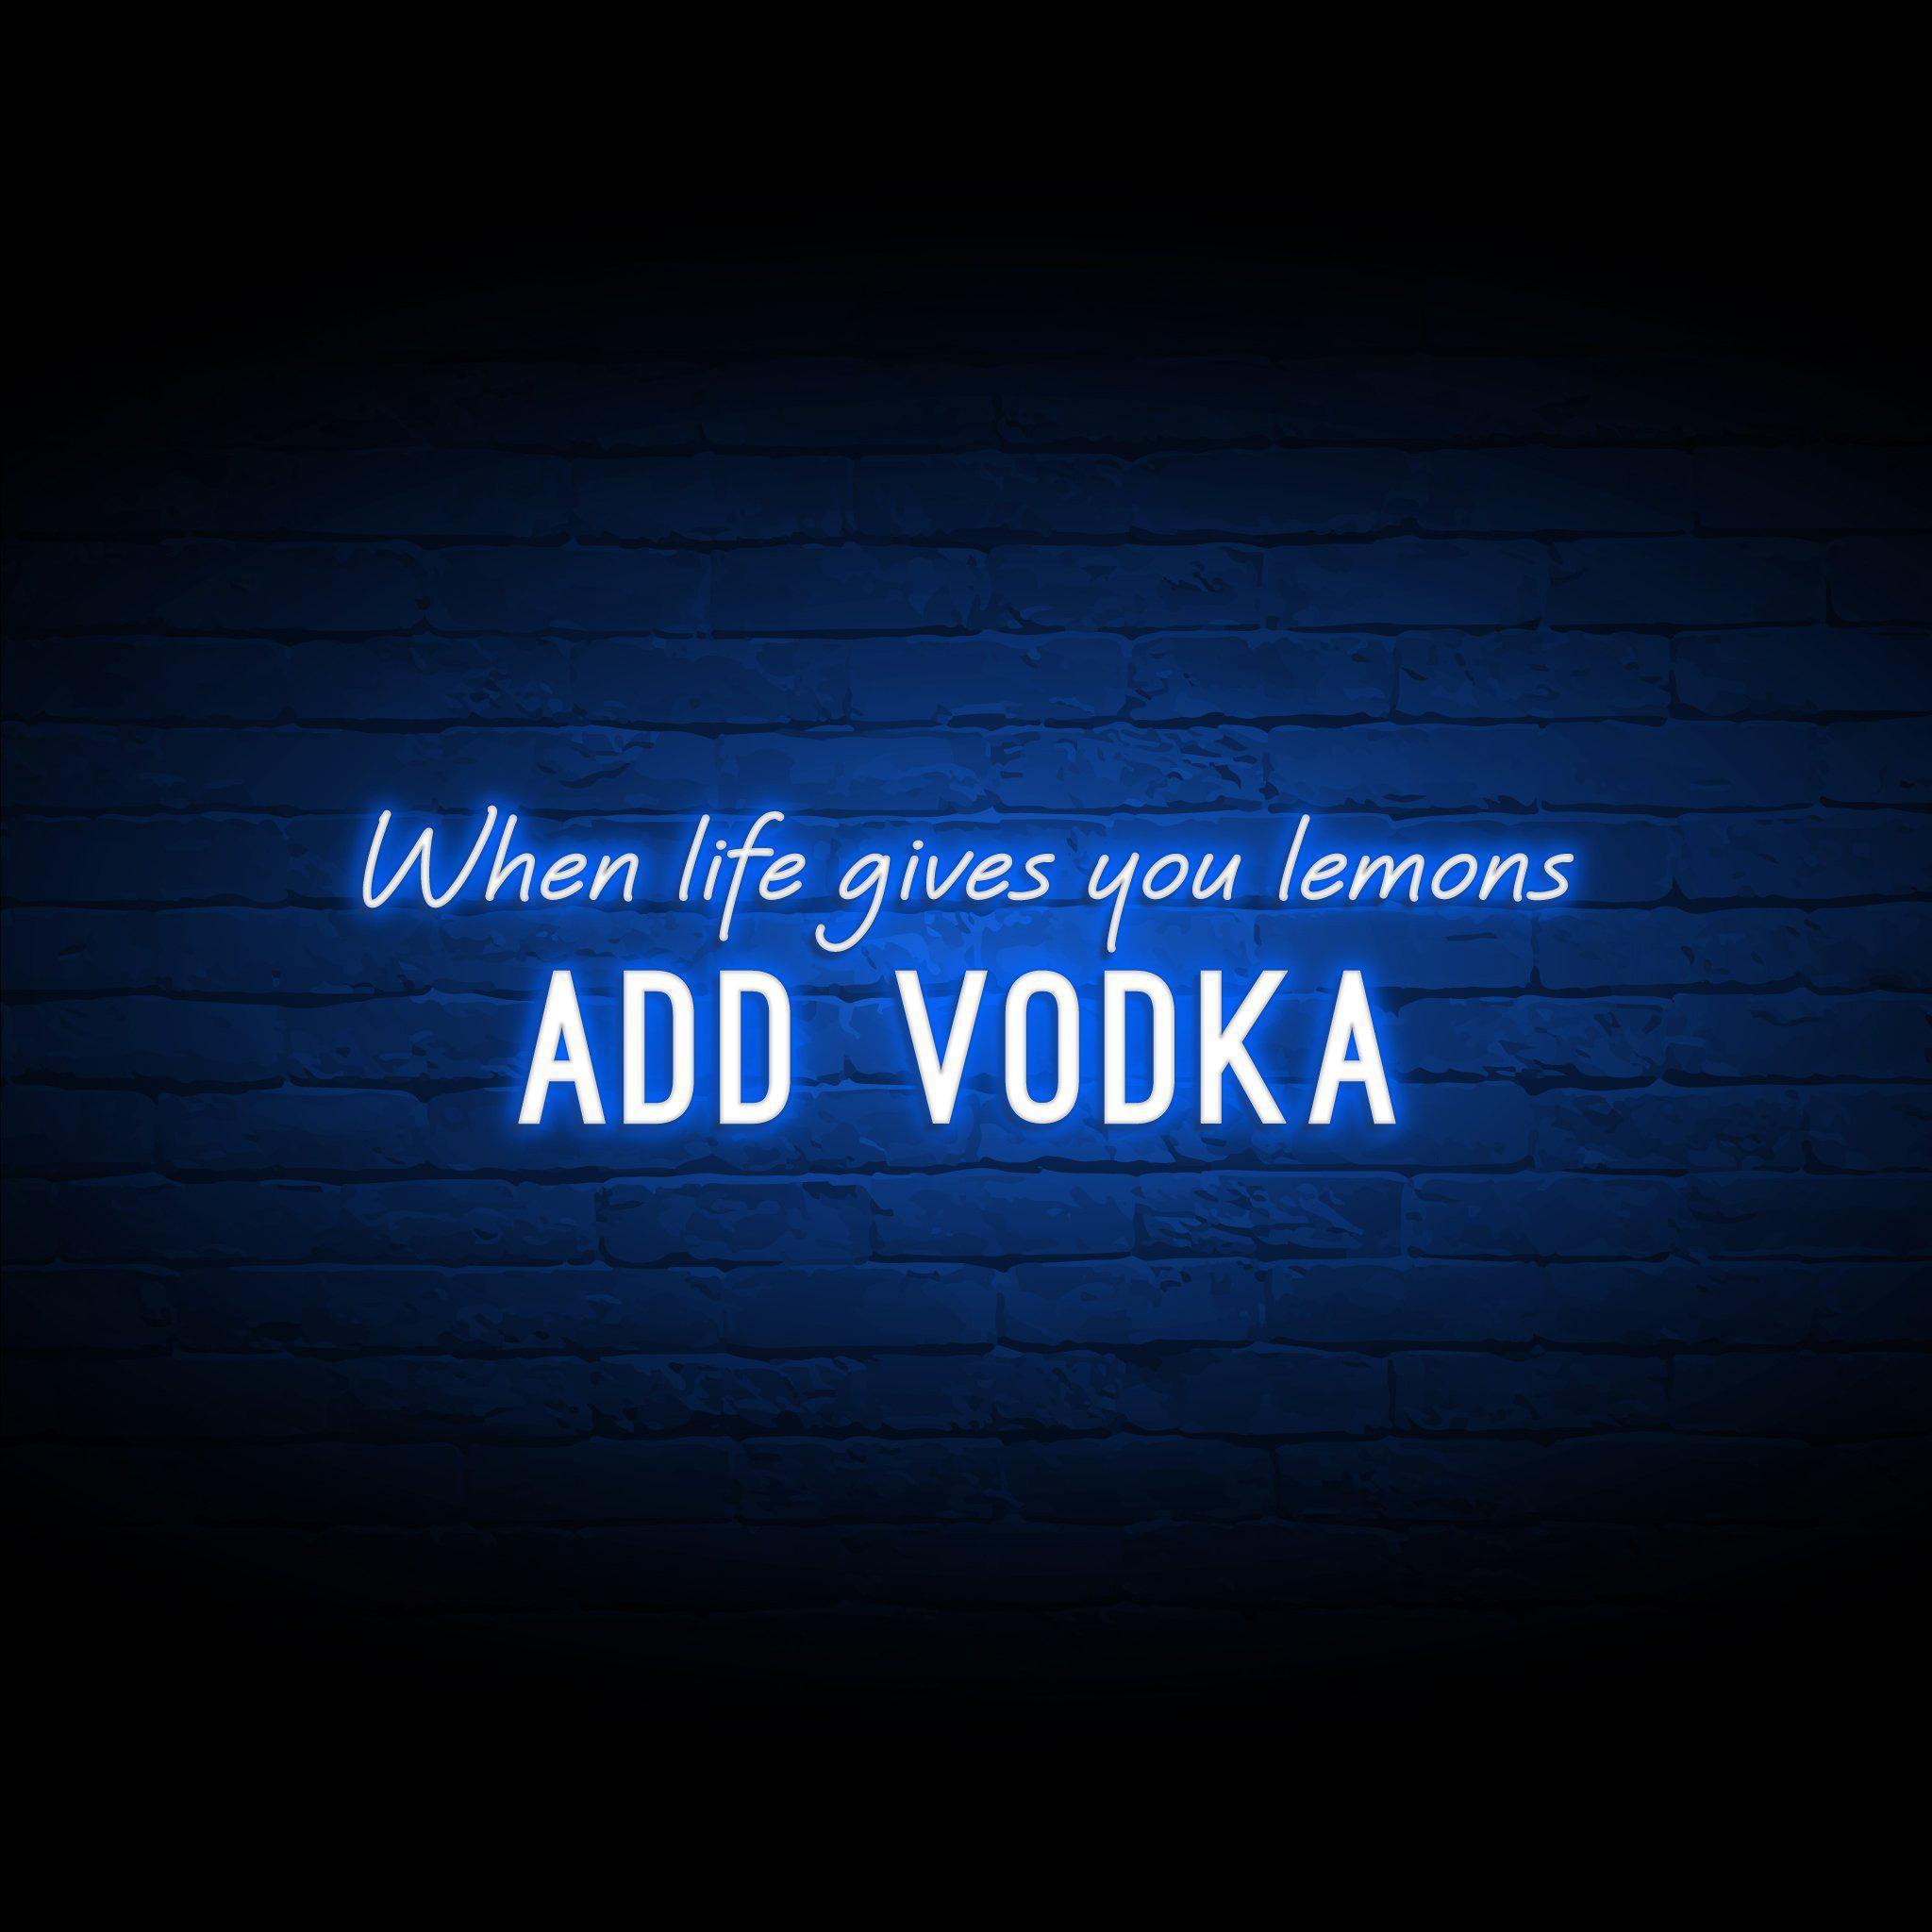 'WHEN LIFE GIVES YOU LEMONS, ADD VODKA' NEON SIGN